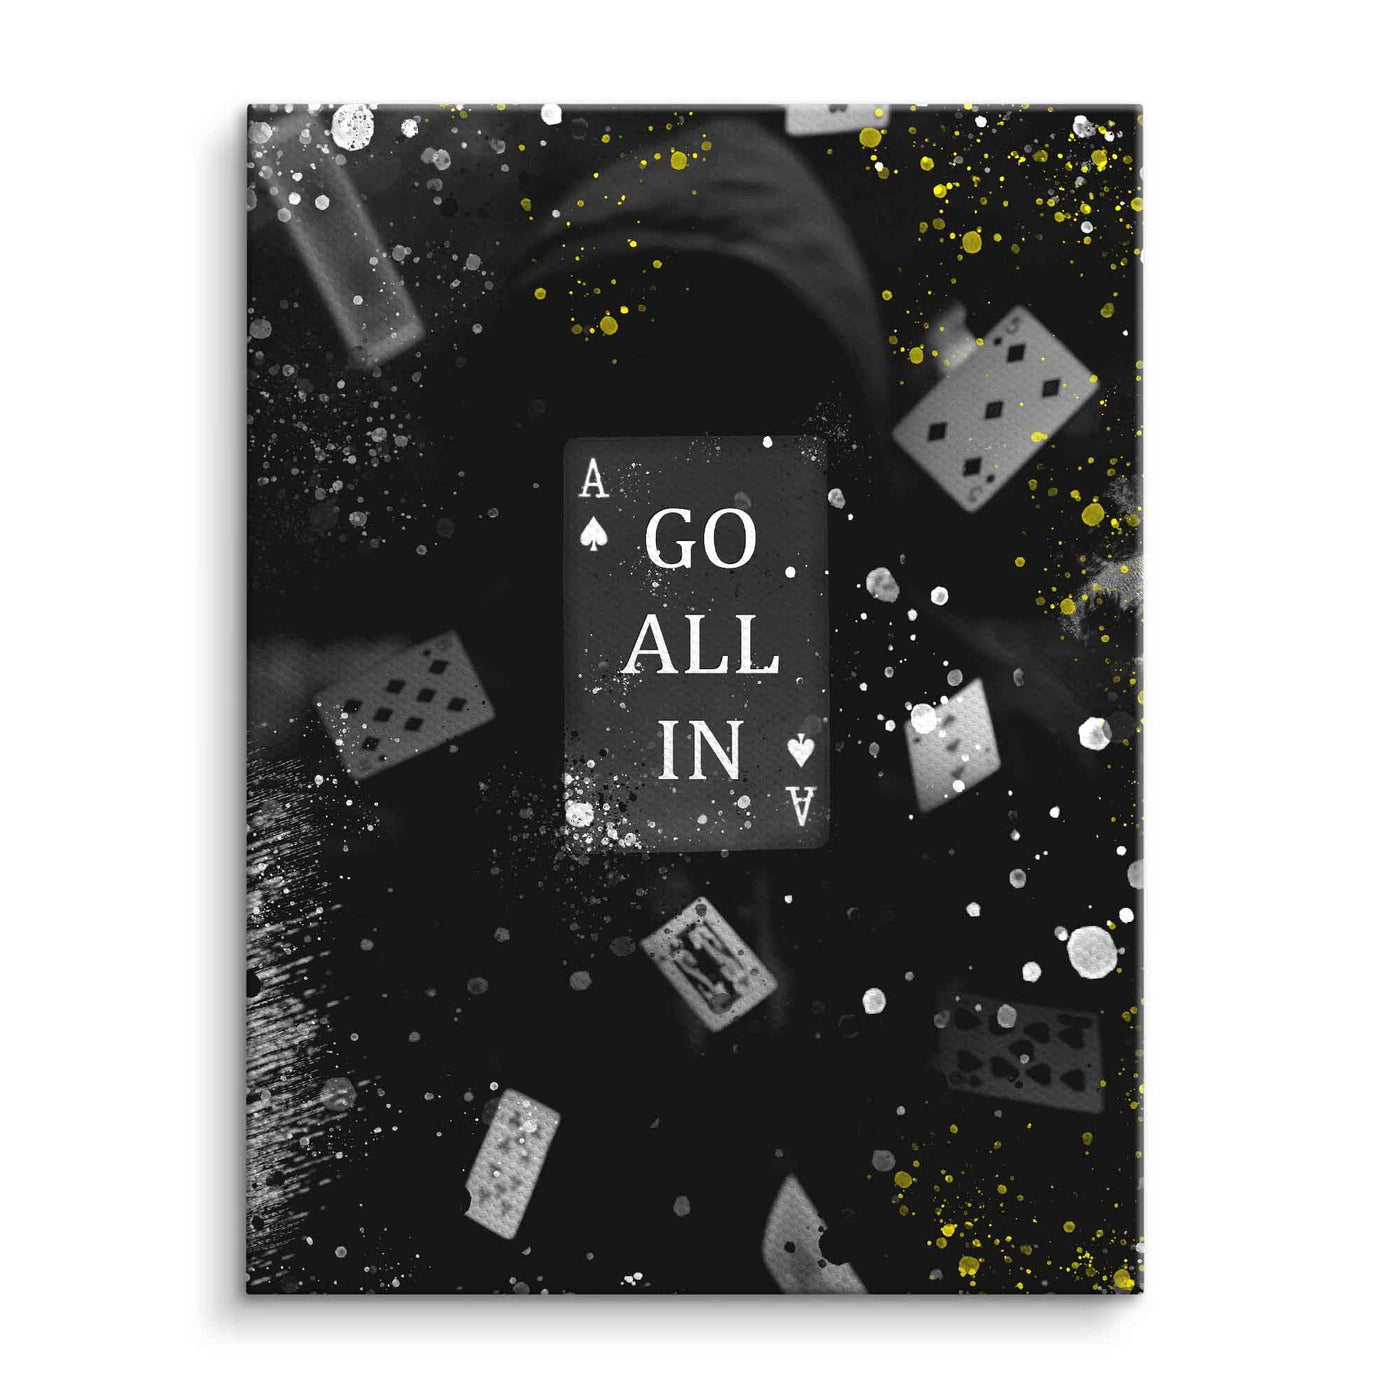 Go all in